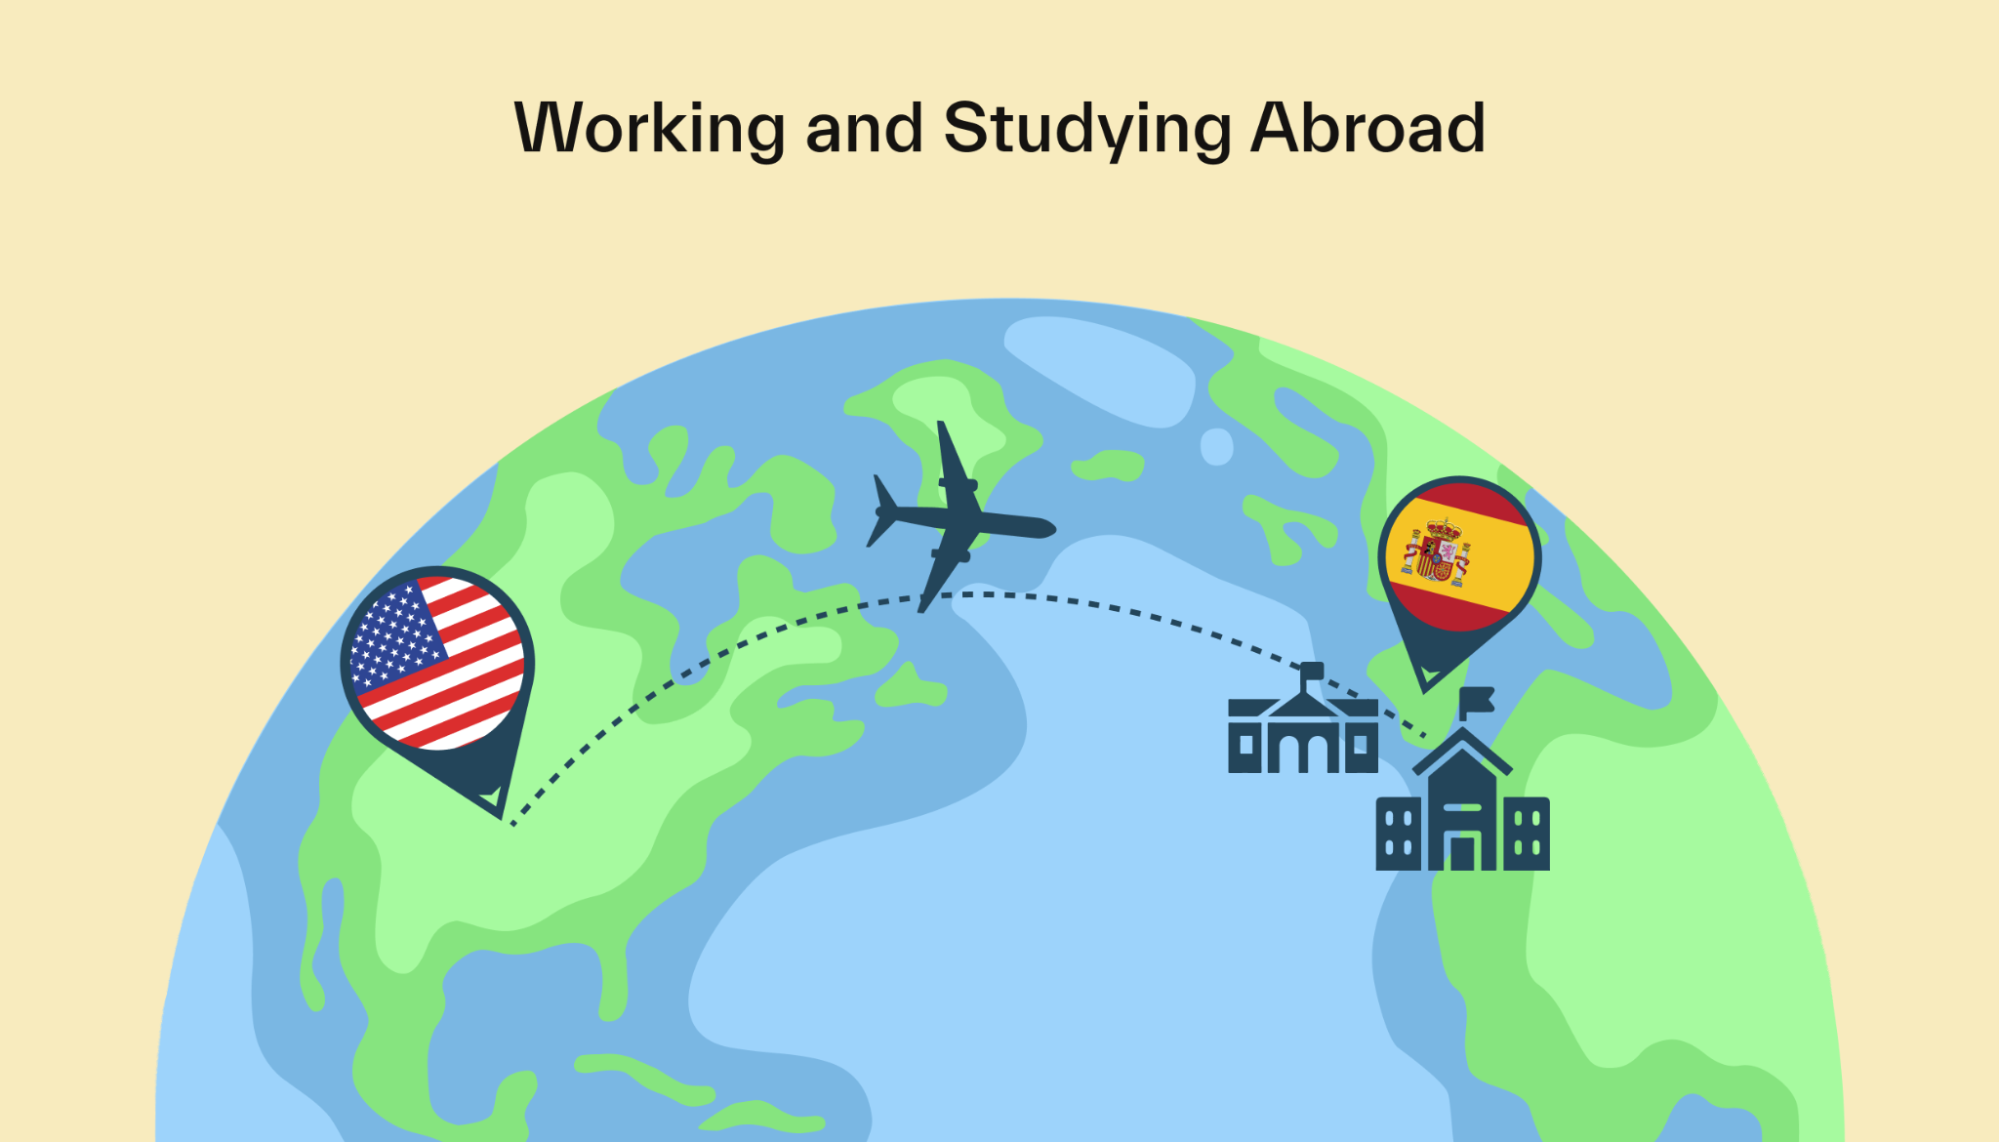 Working and Studying Abroad